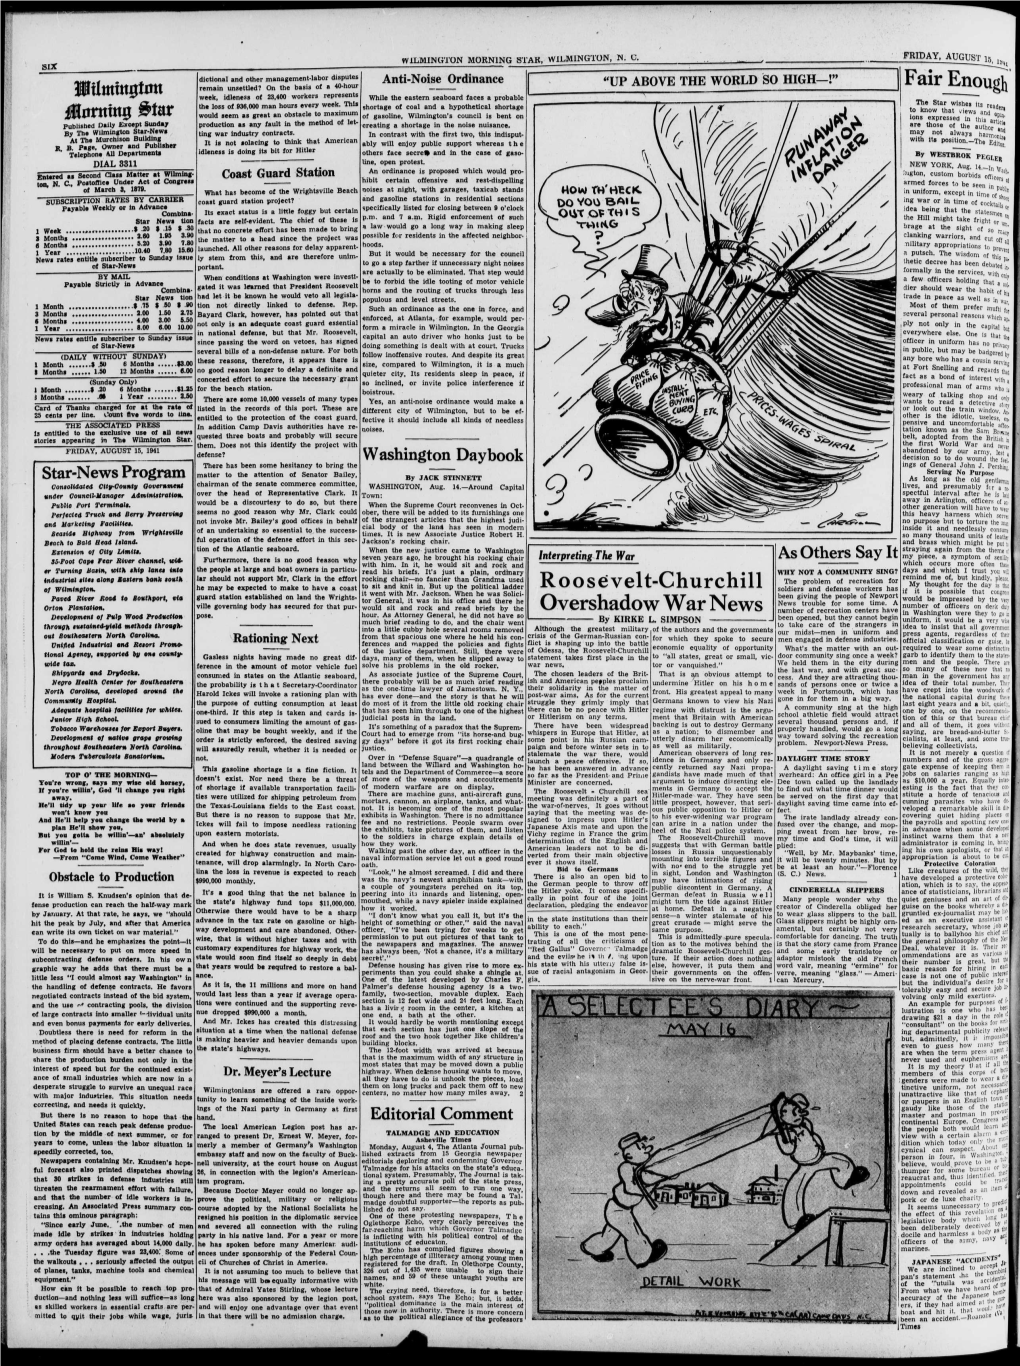 The Wilmington Morning Star (Wilmington, N.C.). 1941-08-15 [P